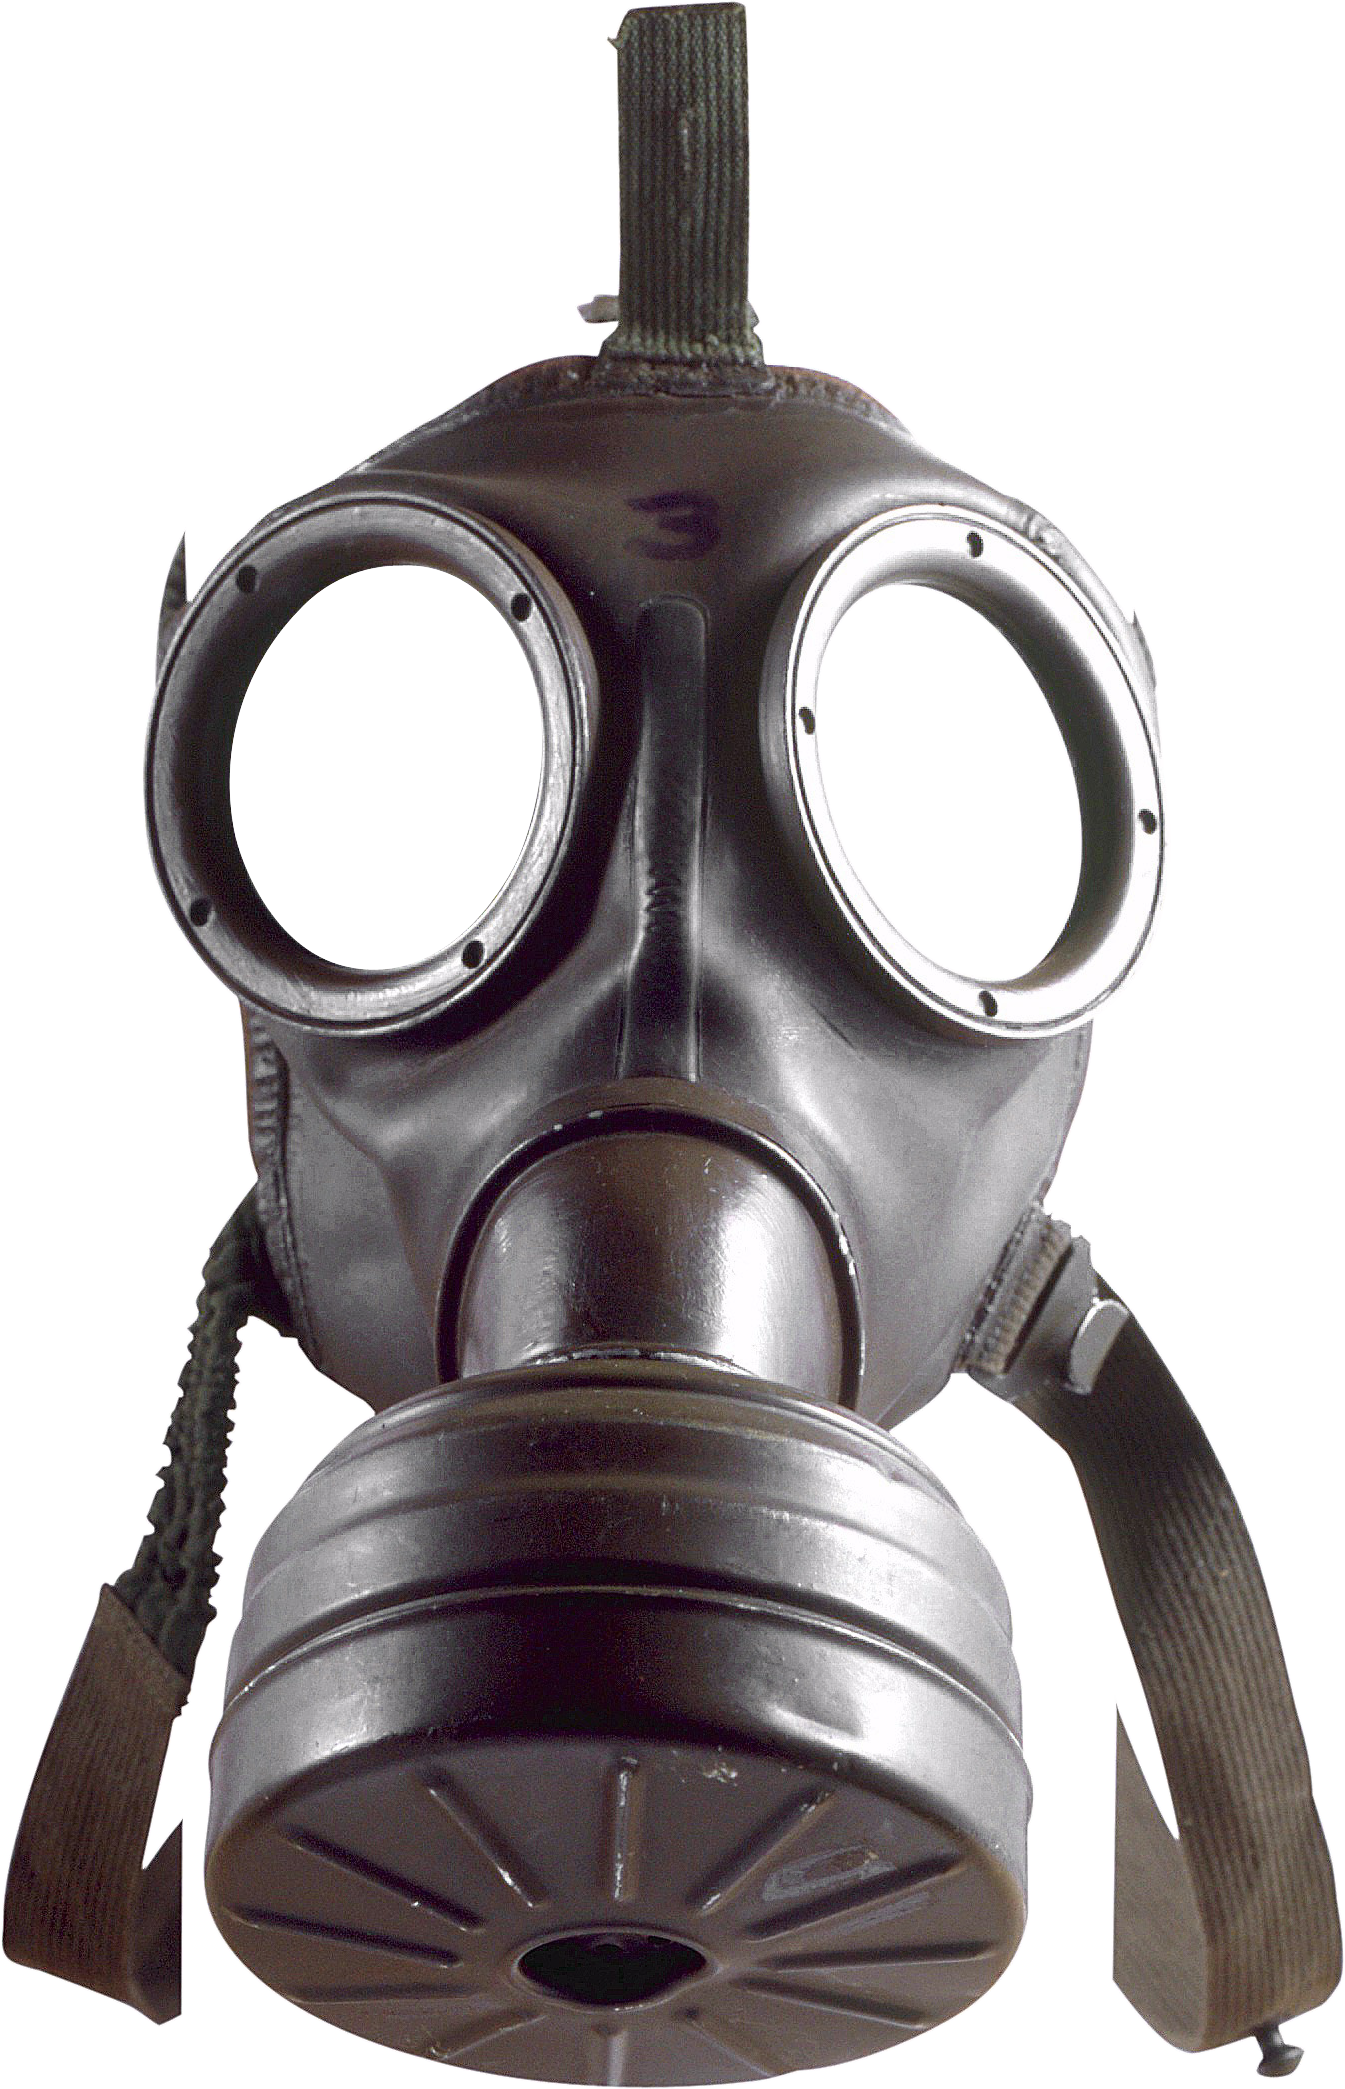 Gas Mask PNG Image